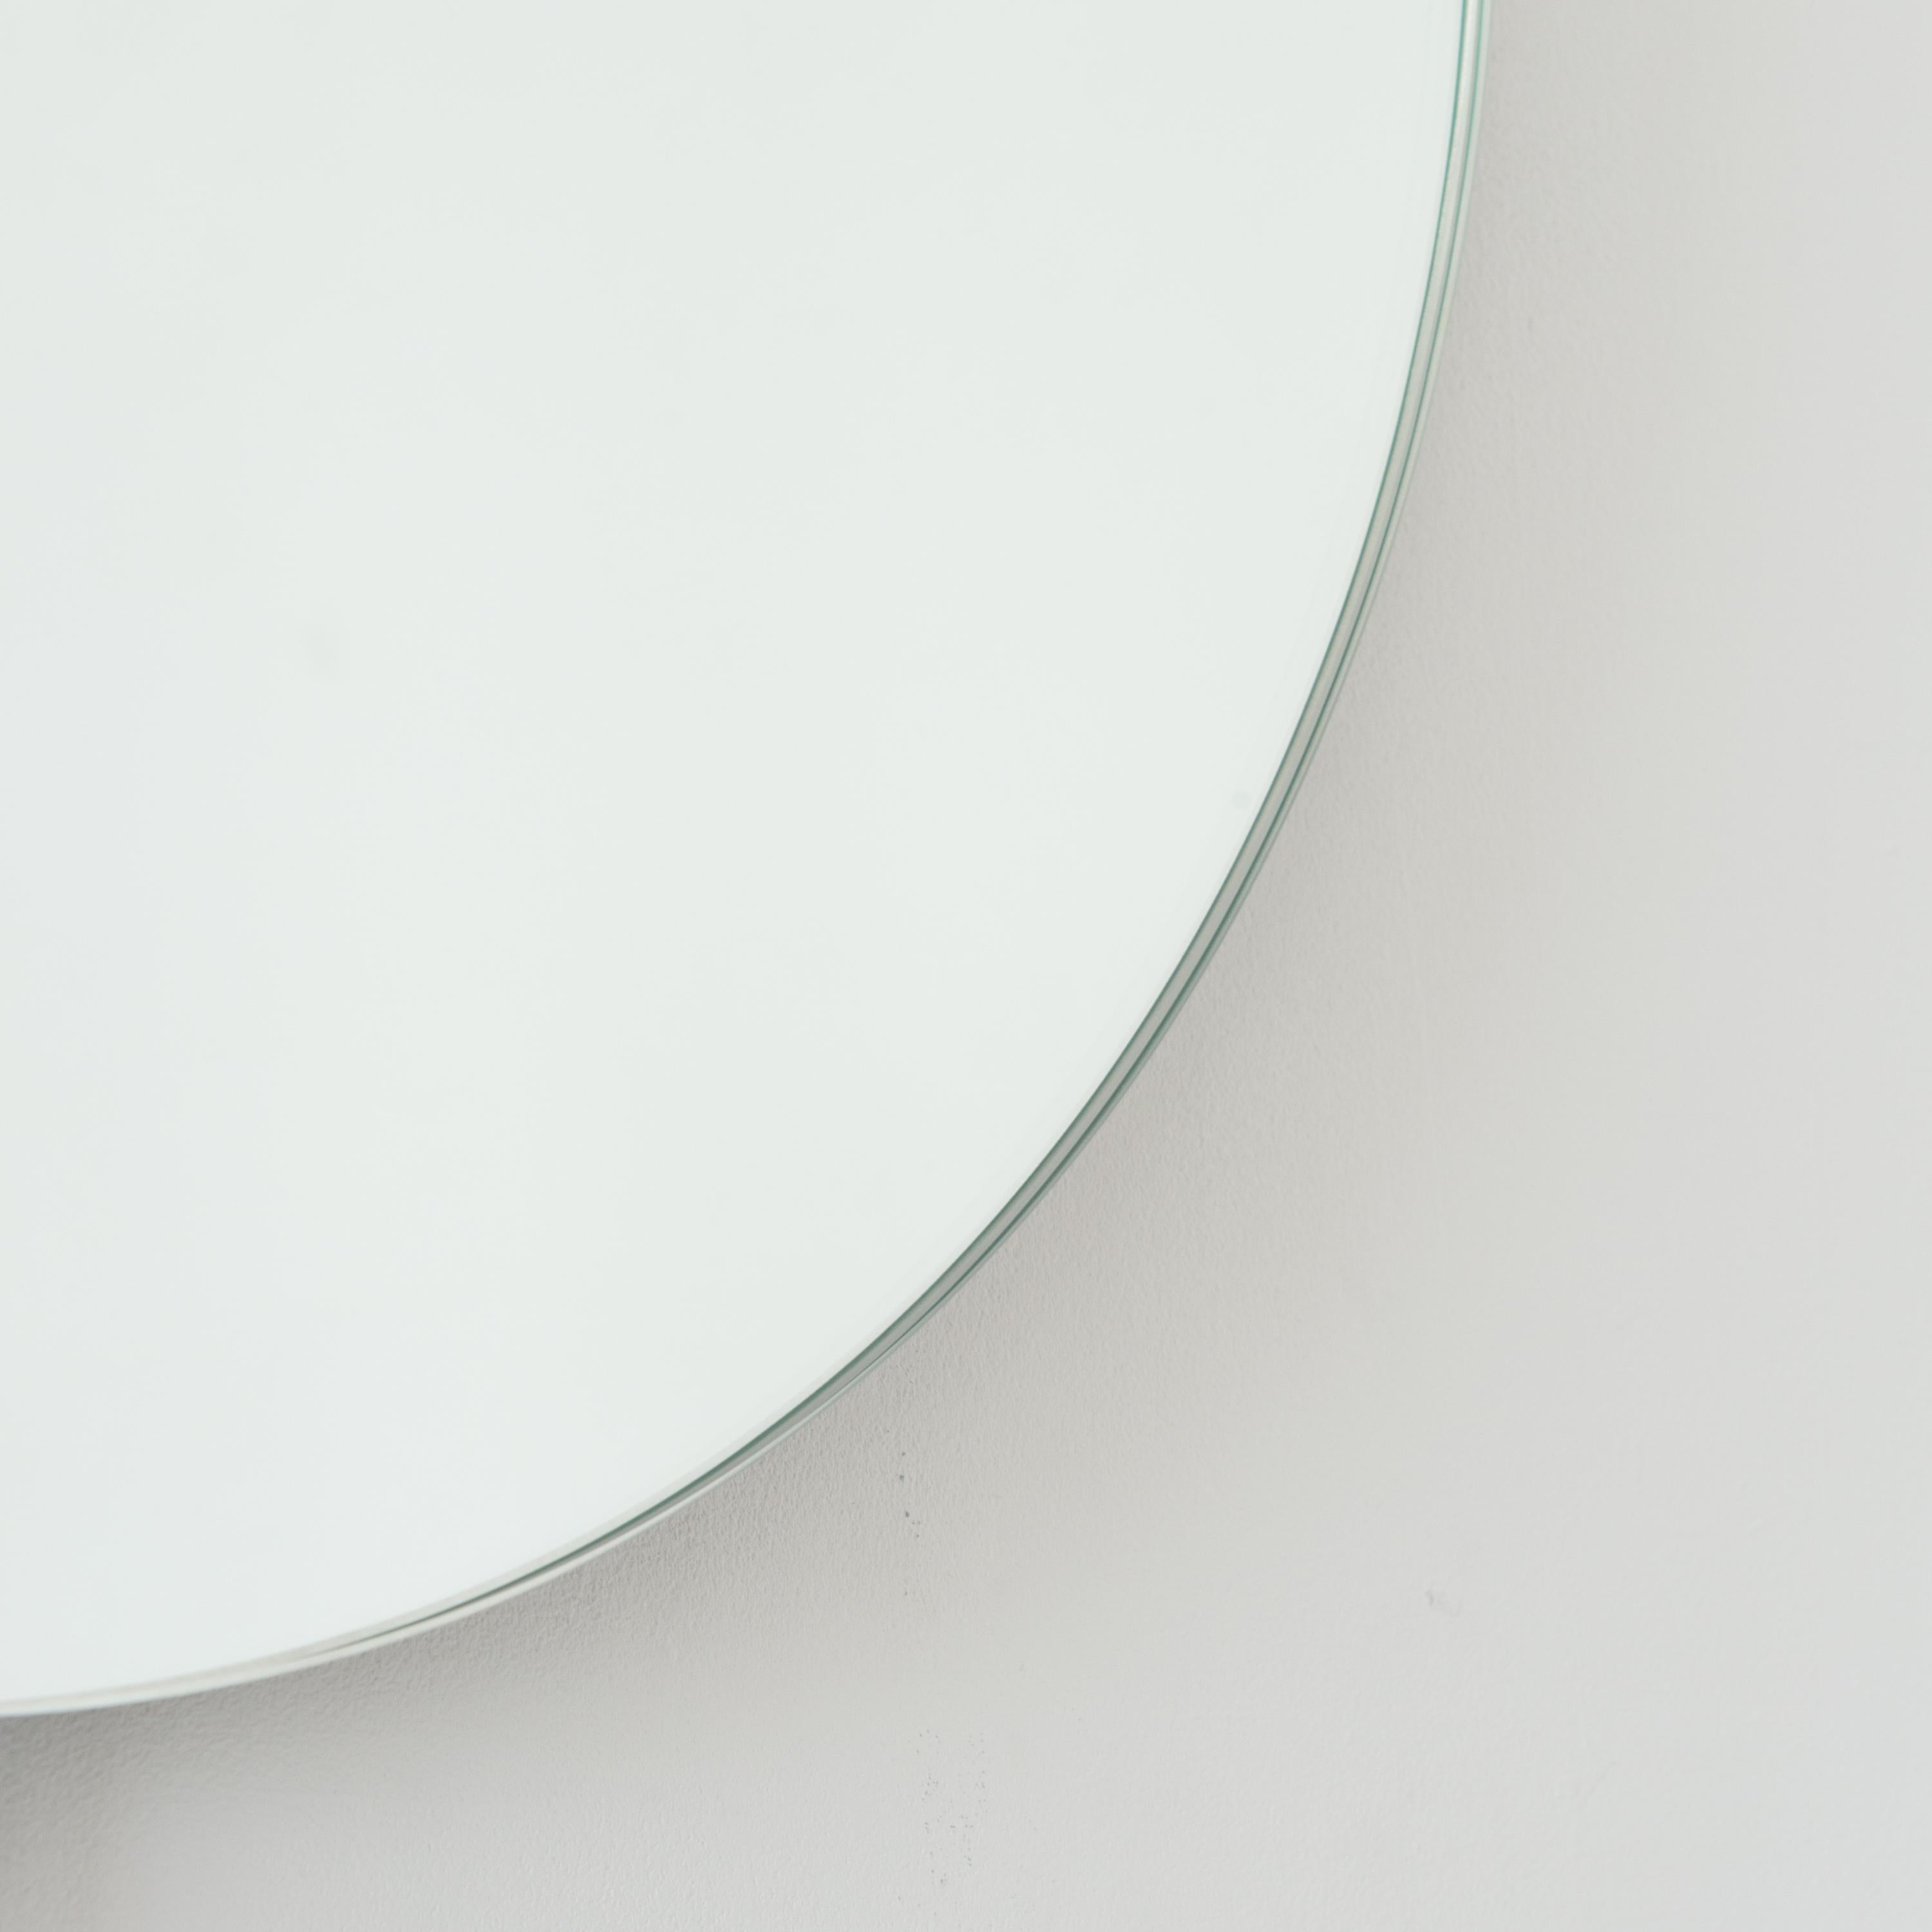 Contemporary back illuminated round frameless mirror with a floating effect. Quality design that ensures the mirror sits perfectly parallel to the wall. Designed and made in London, UK.

Fitted with professional plates not visible once installed for